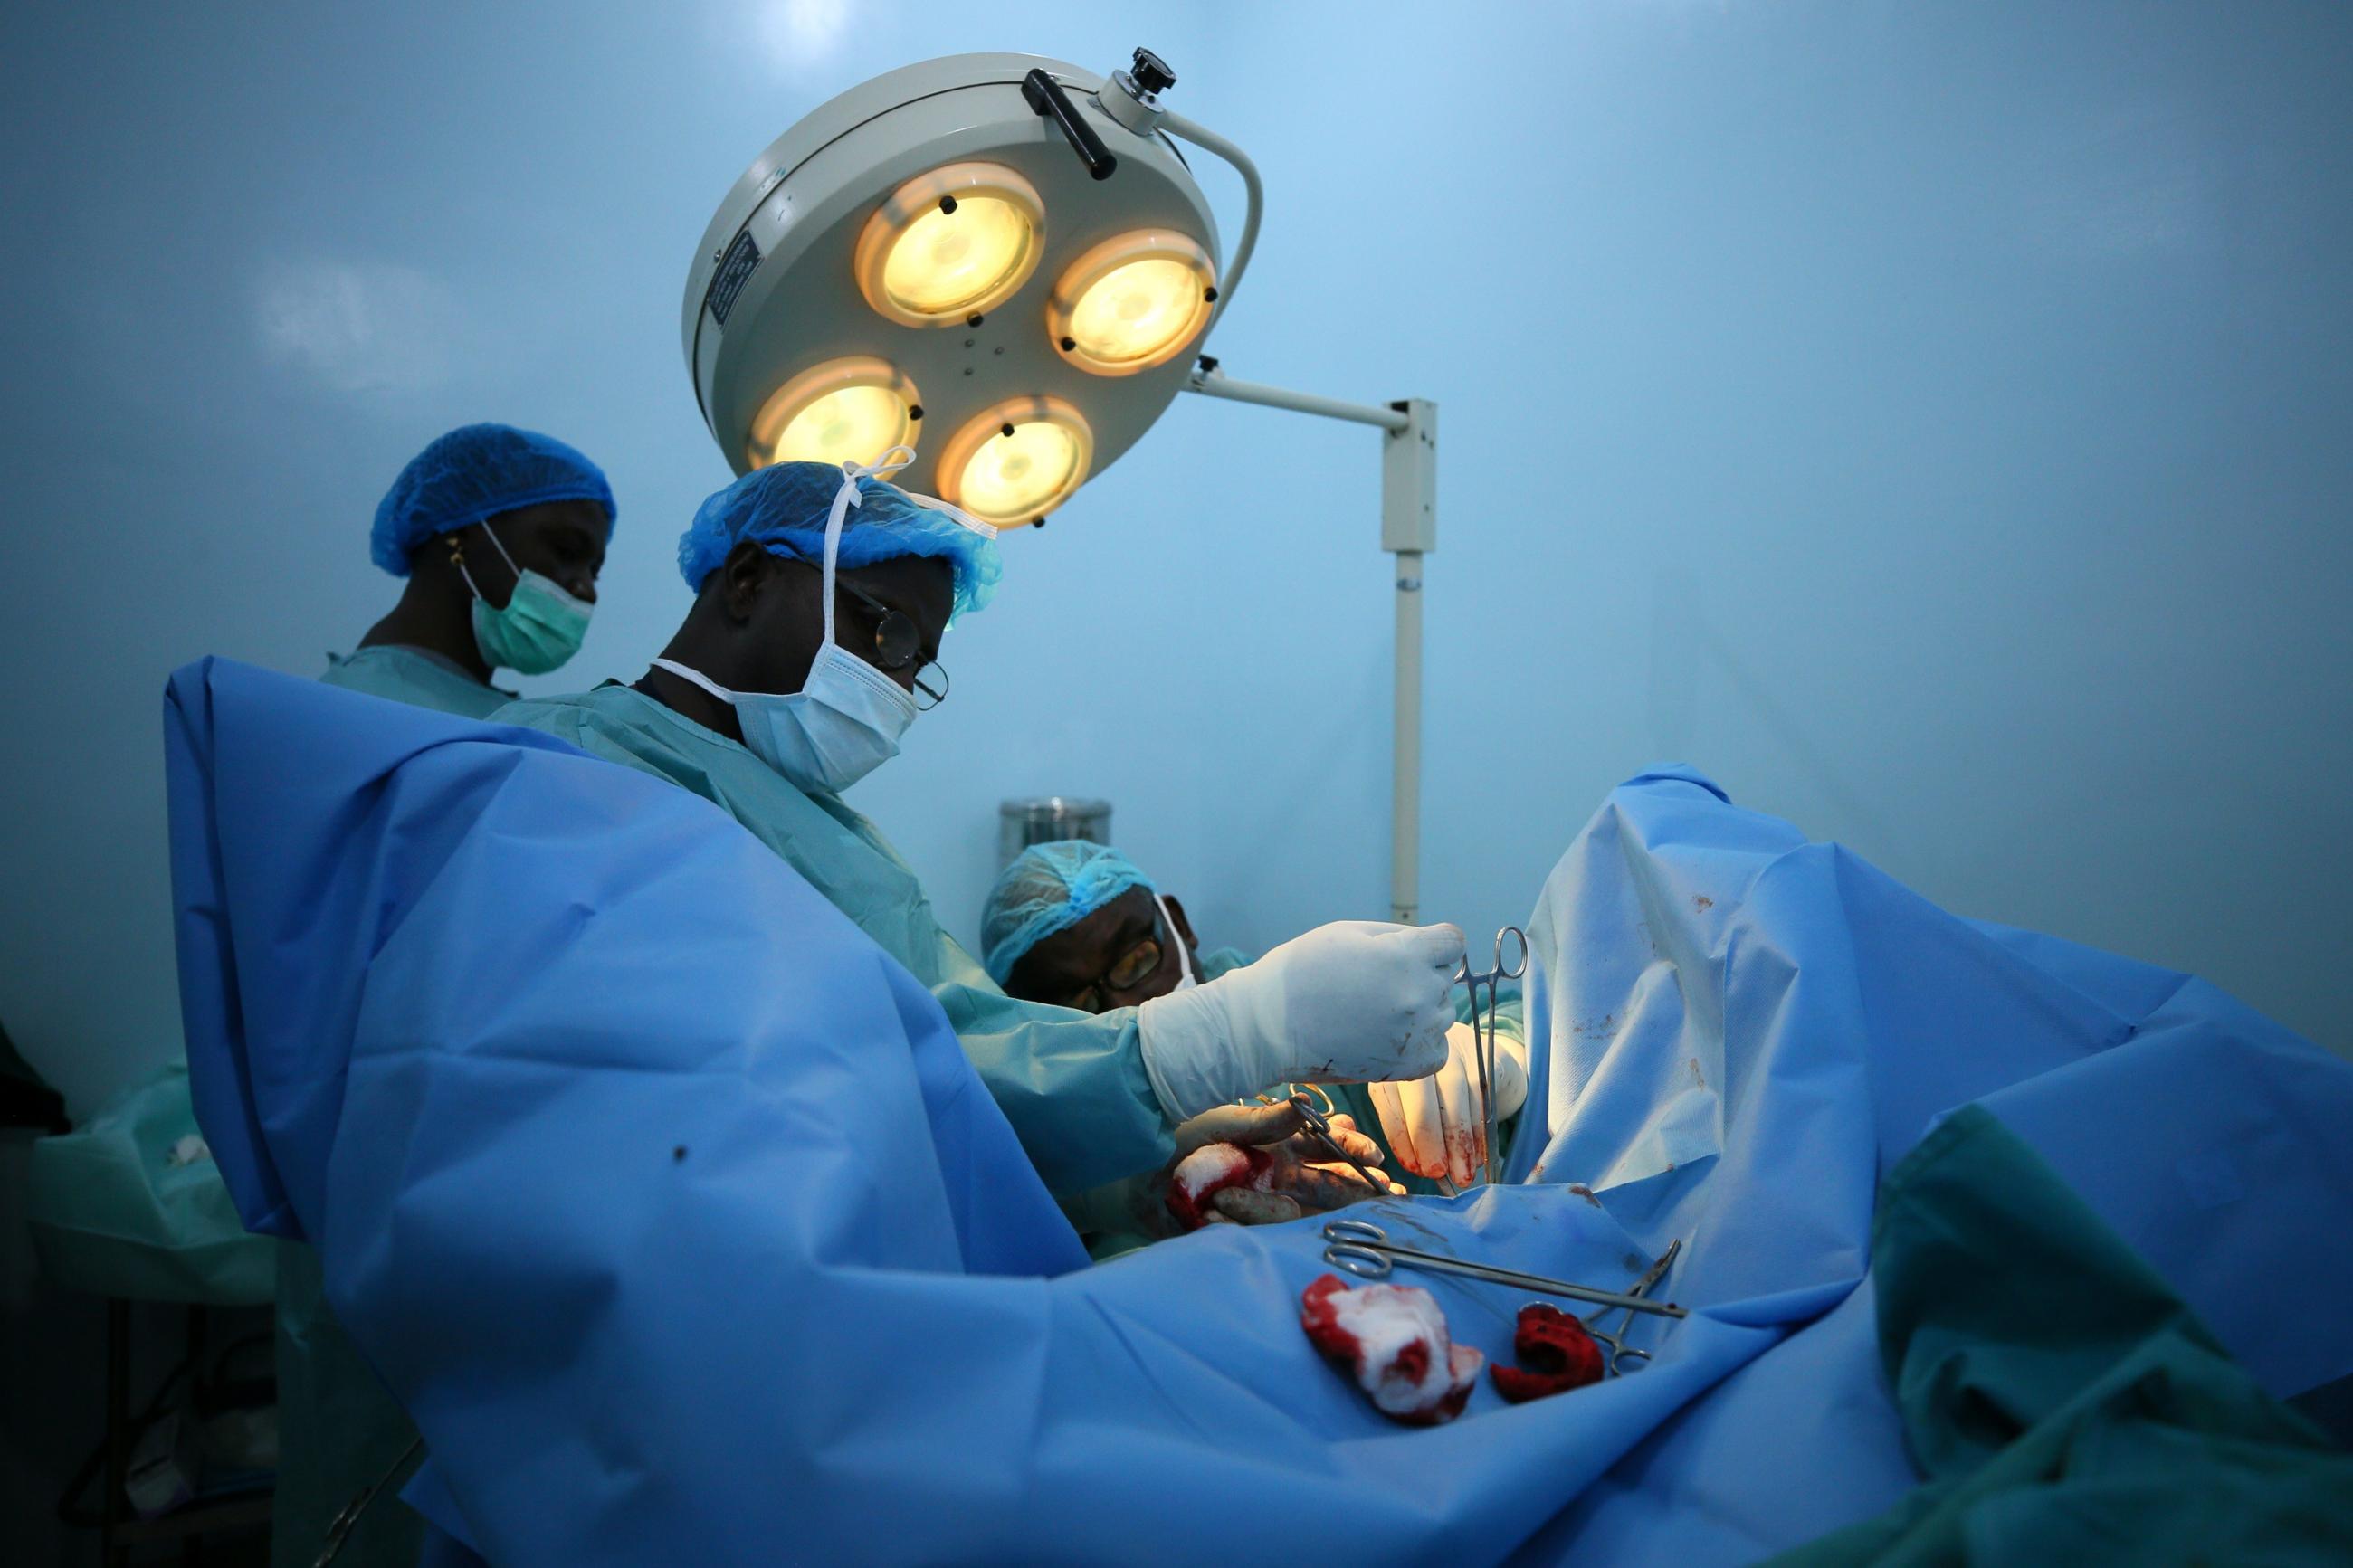 Nigerian surgeons in blue gowns and masks operate on a patient hidden beneath a blue sheet under a large surgical lamp in a room with blue walls. 